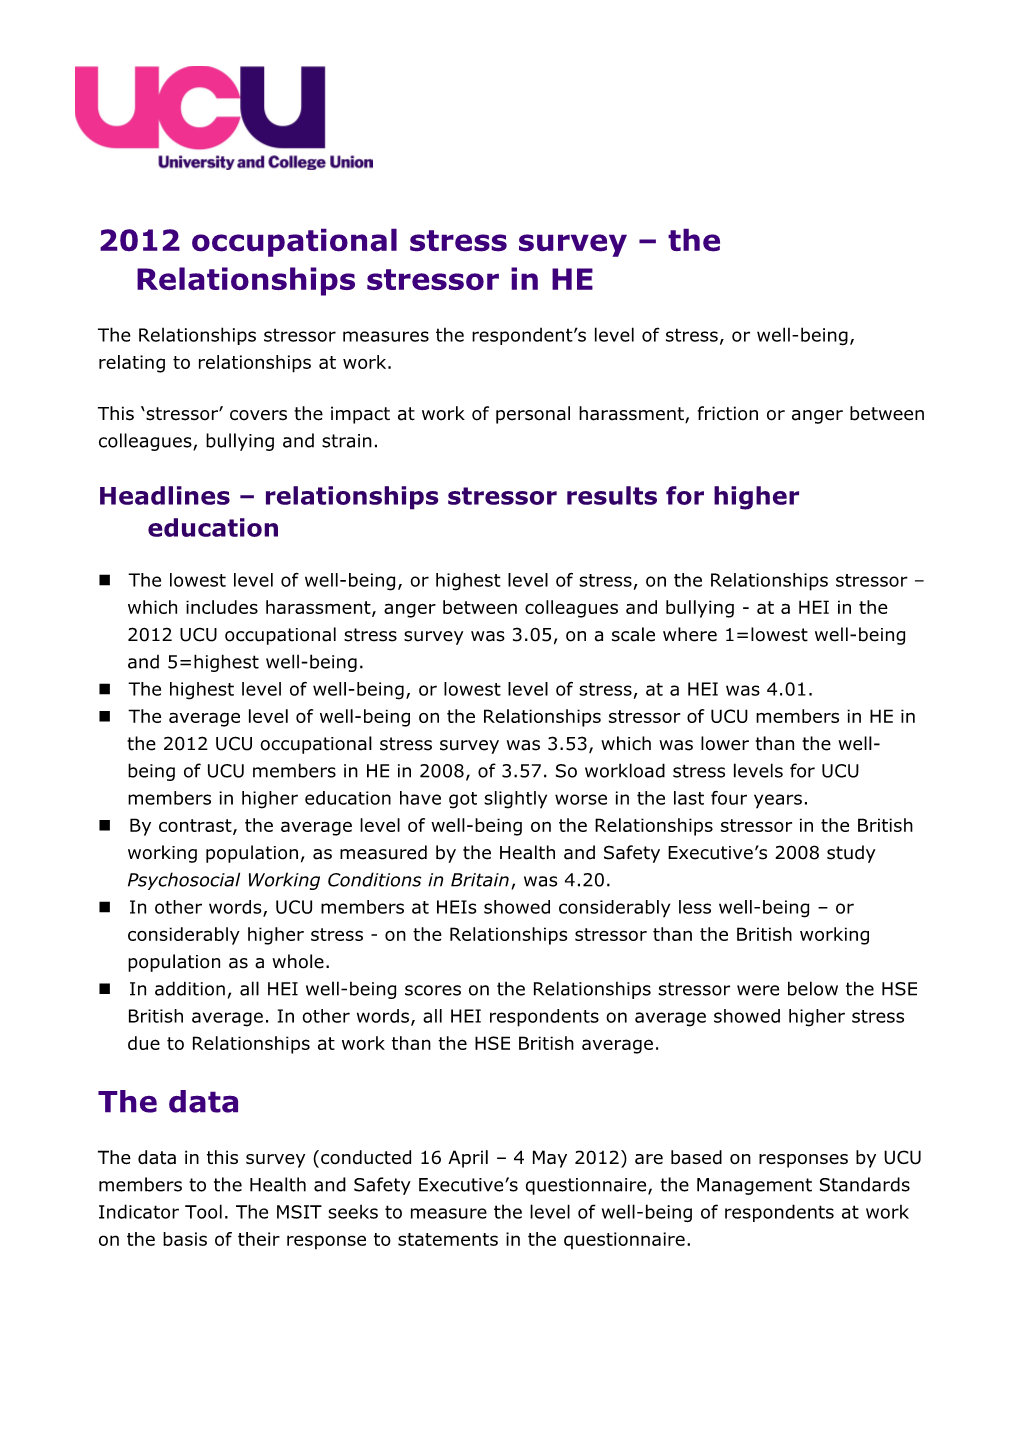 2012 Occupational Stress Survey the Relationships Stressor in HE